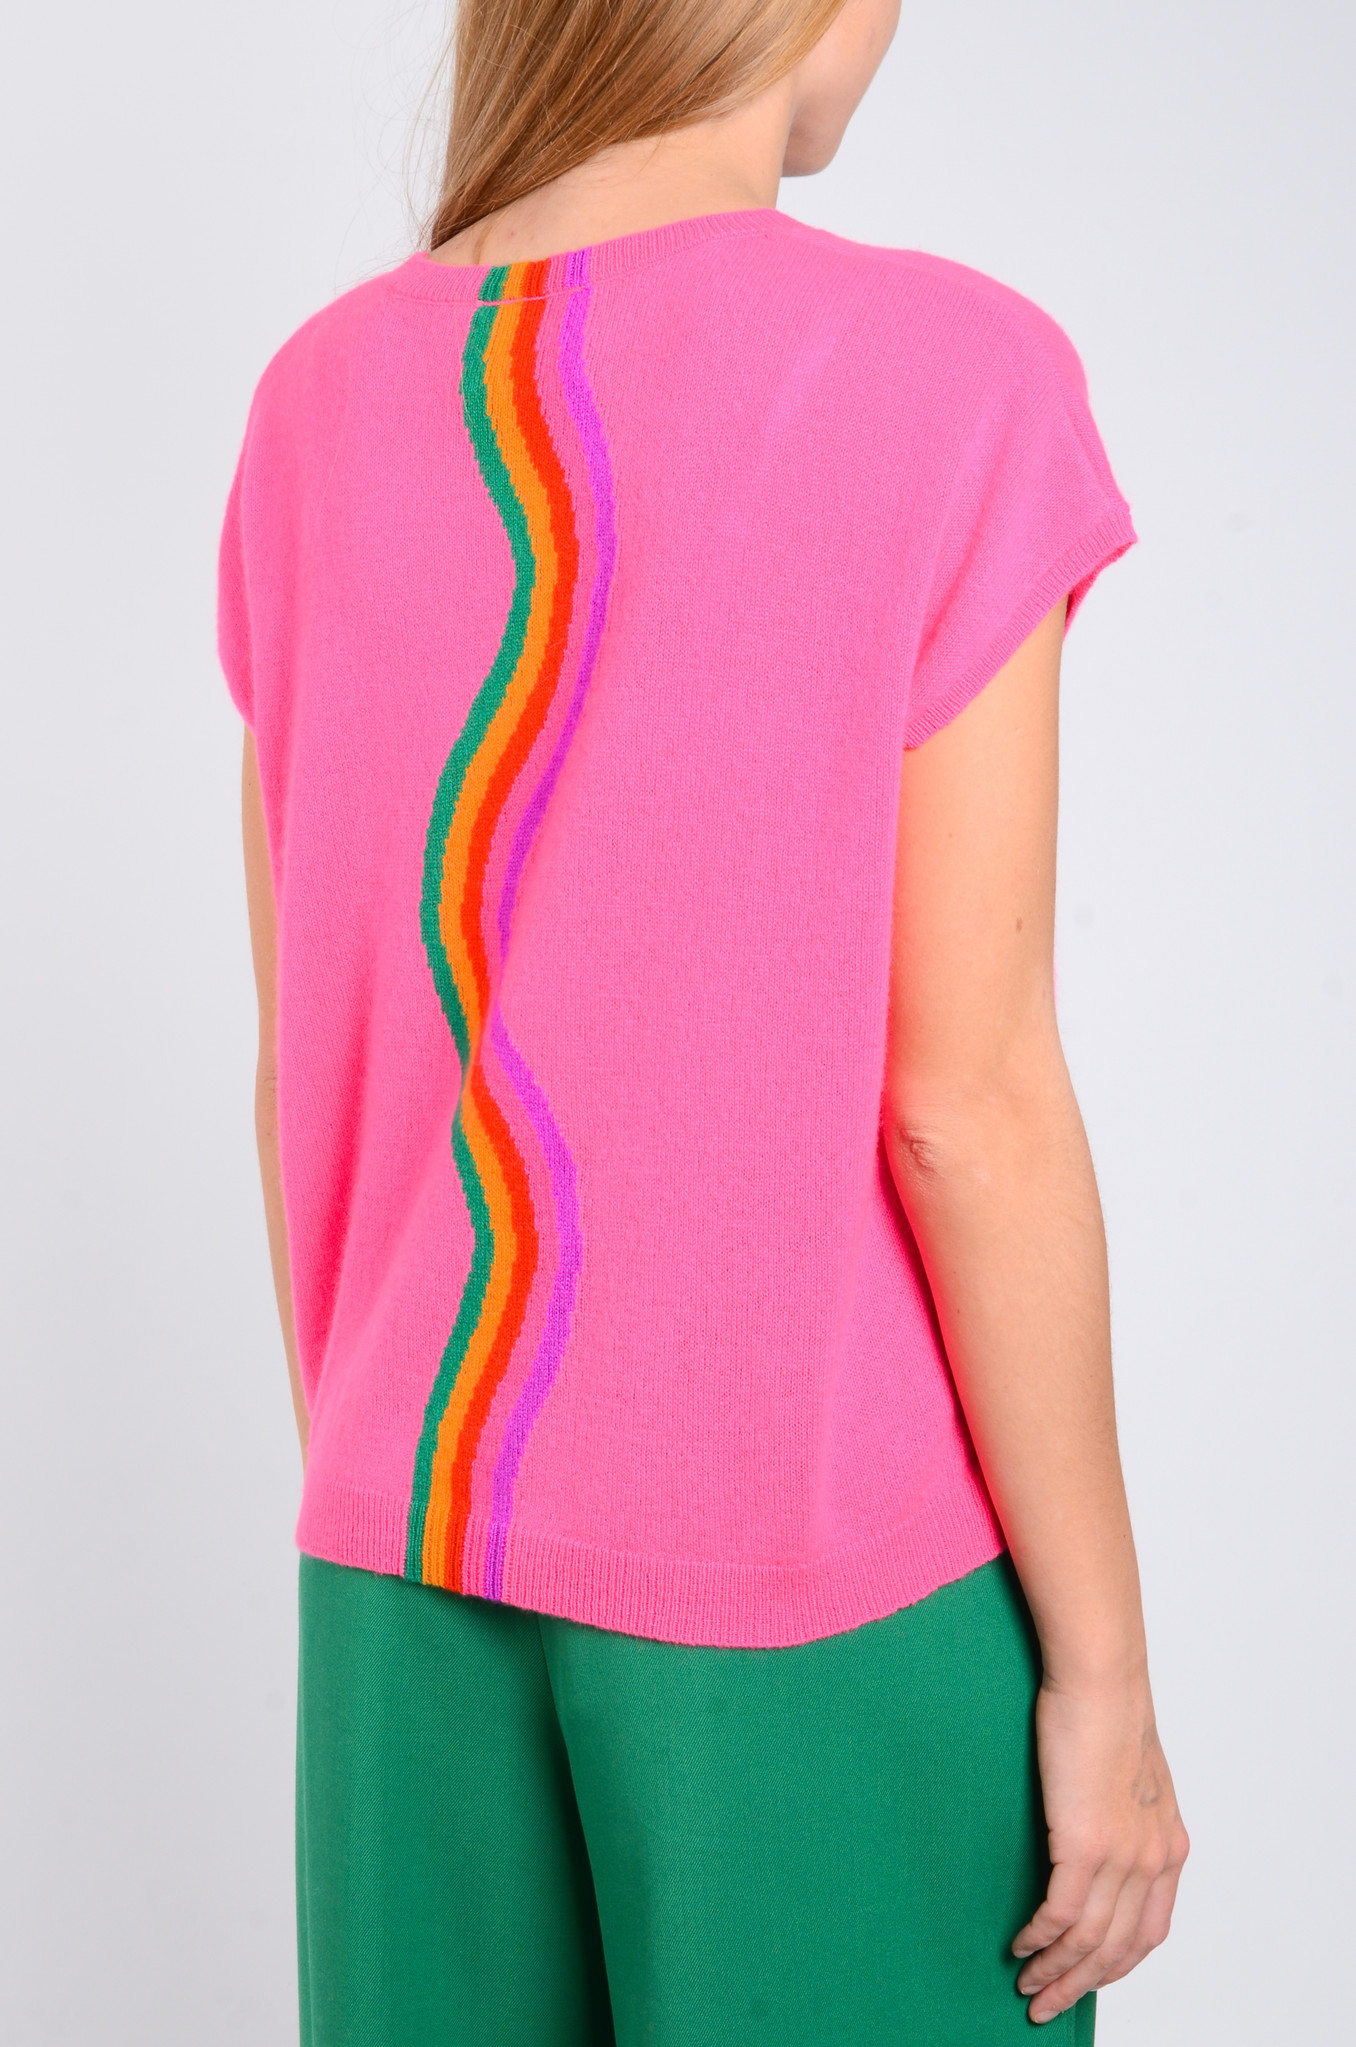 Remi Sweater in Neon Pink-5